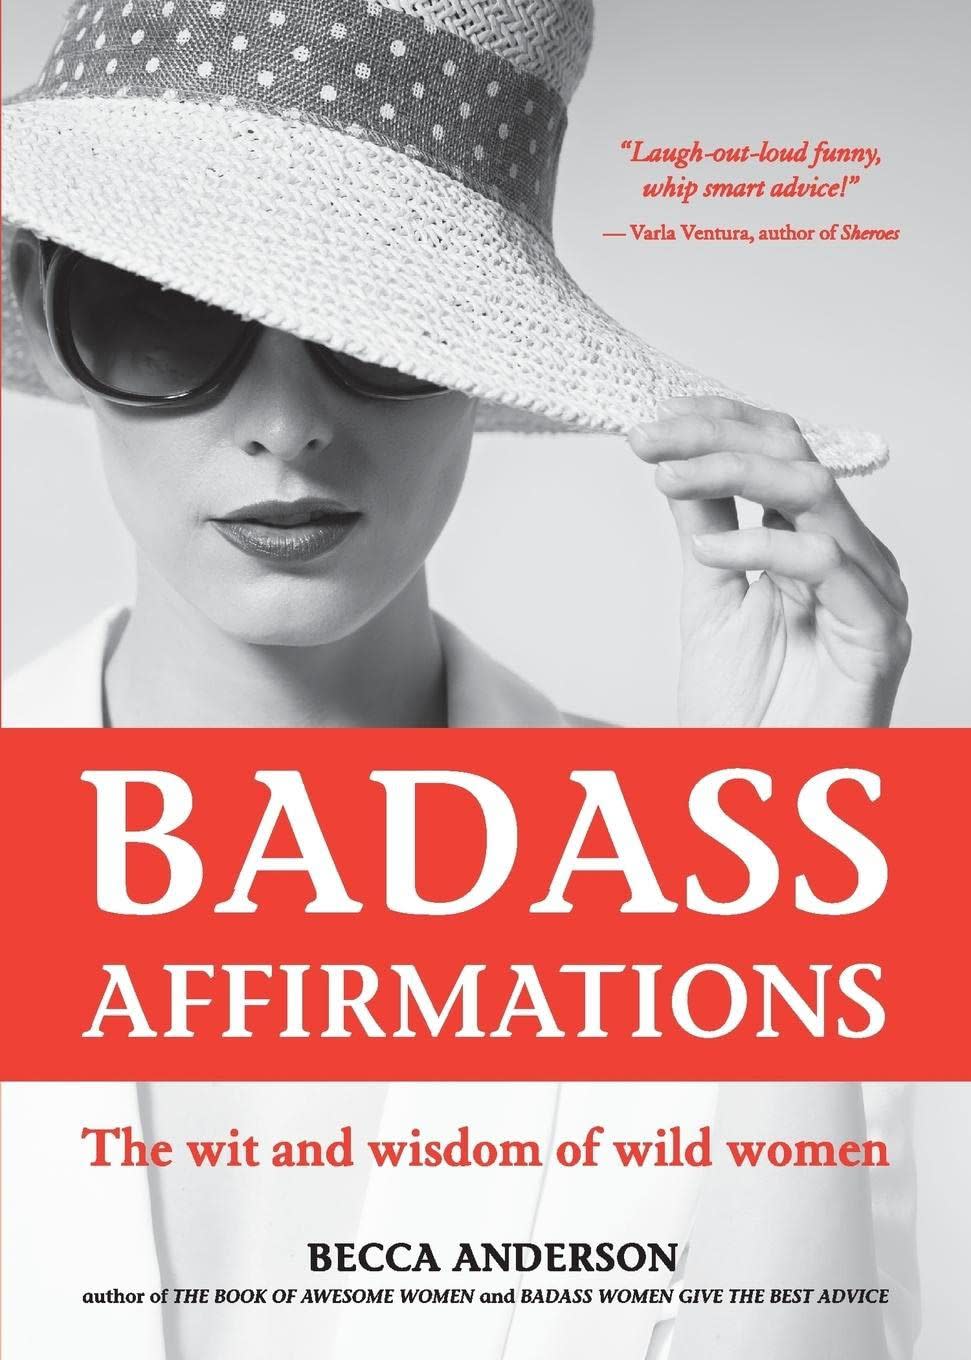 Badass Affirmations: The Wit and Wisdom of Wild Women, By Becca Anderson